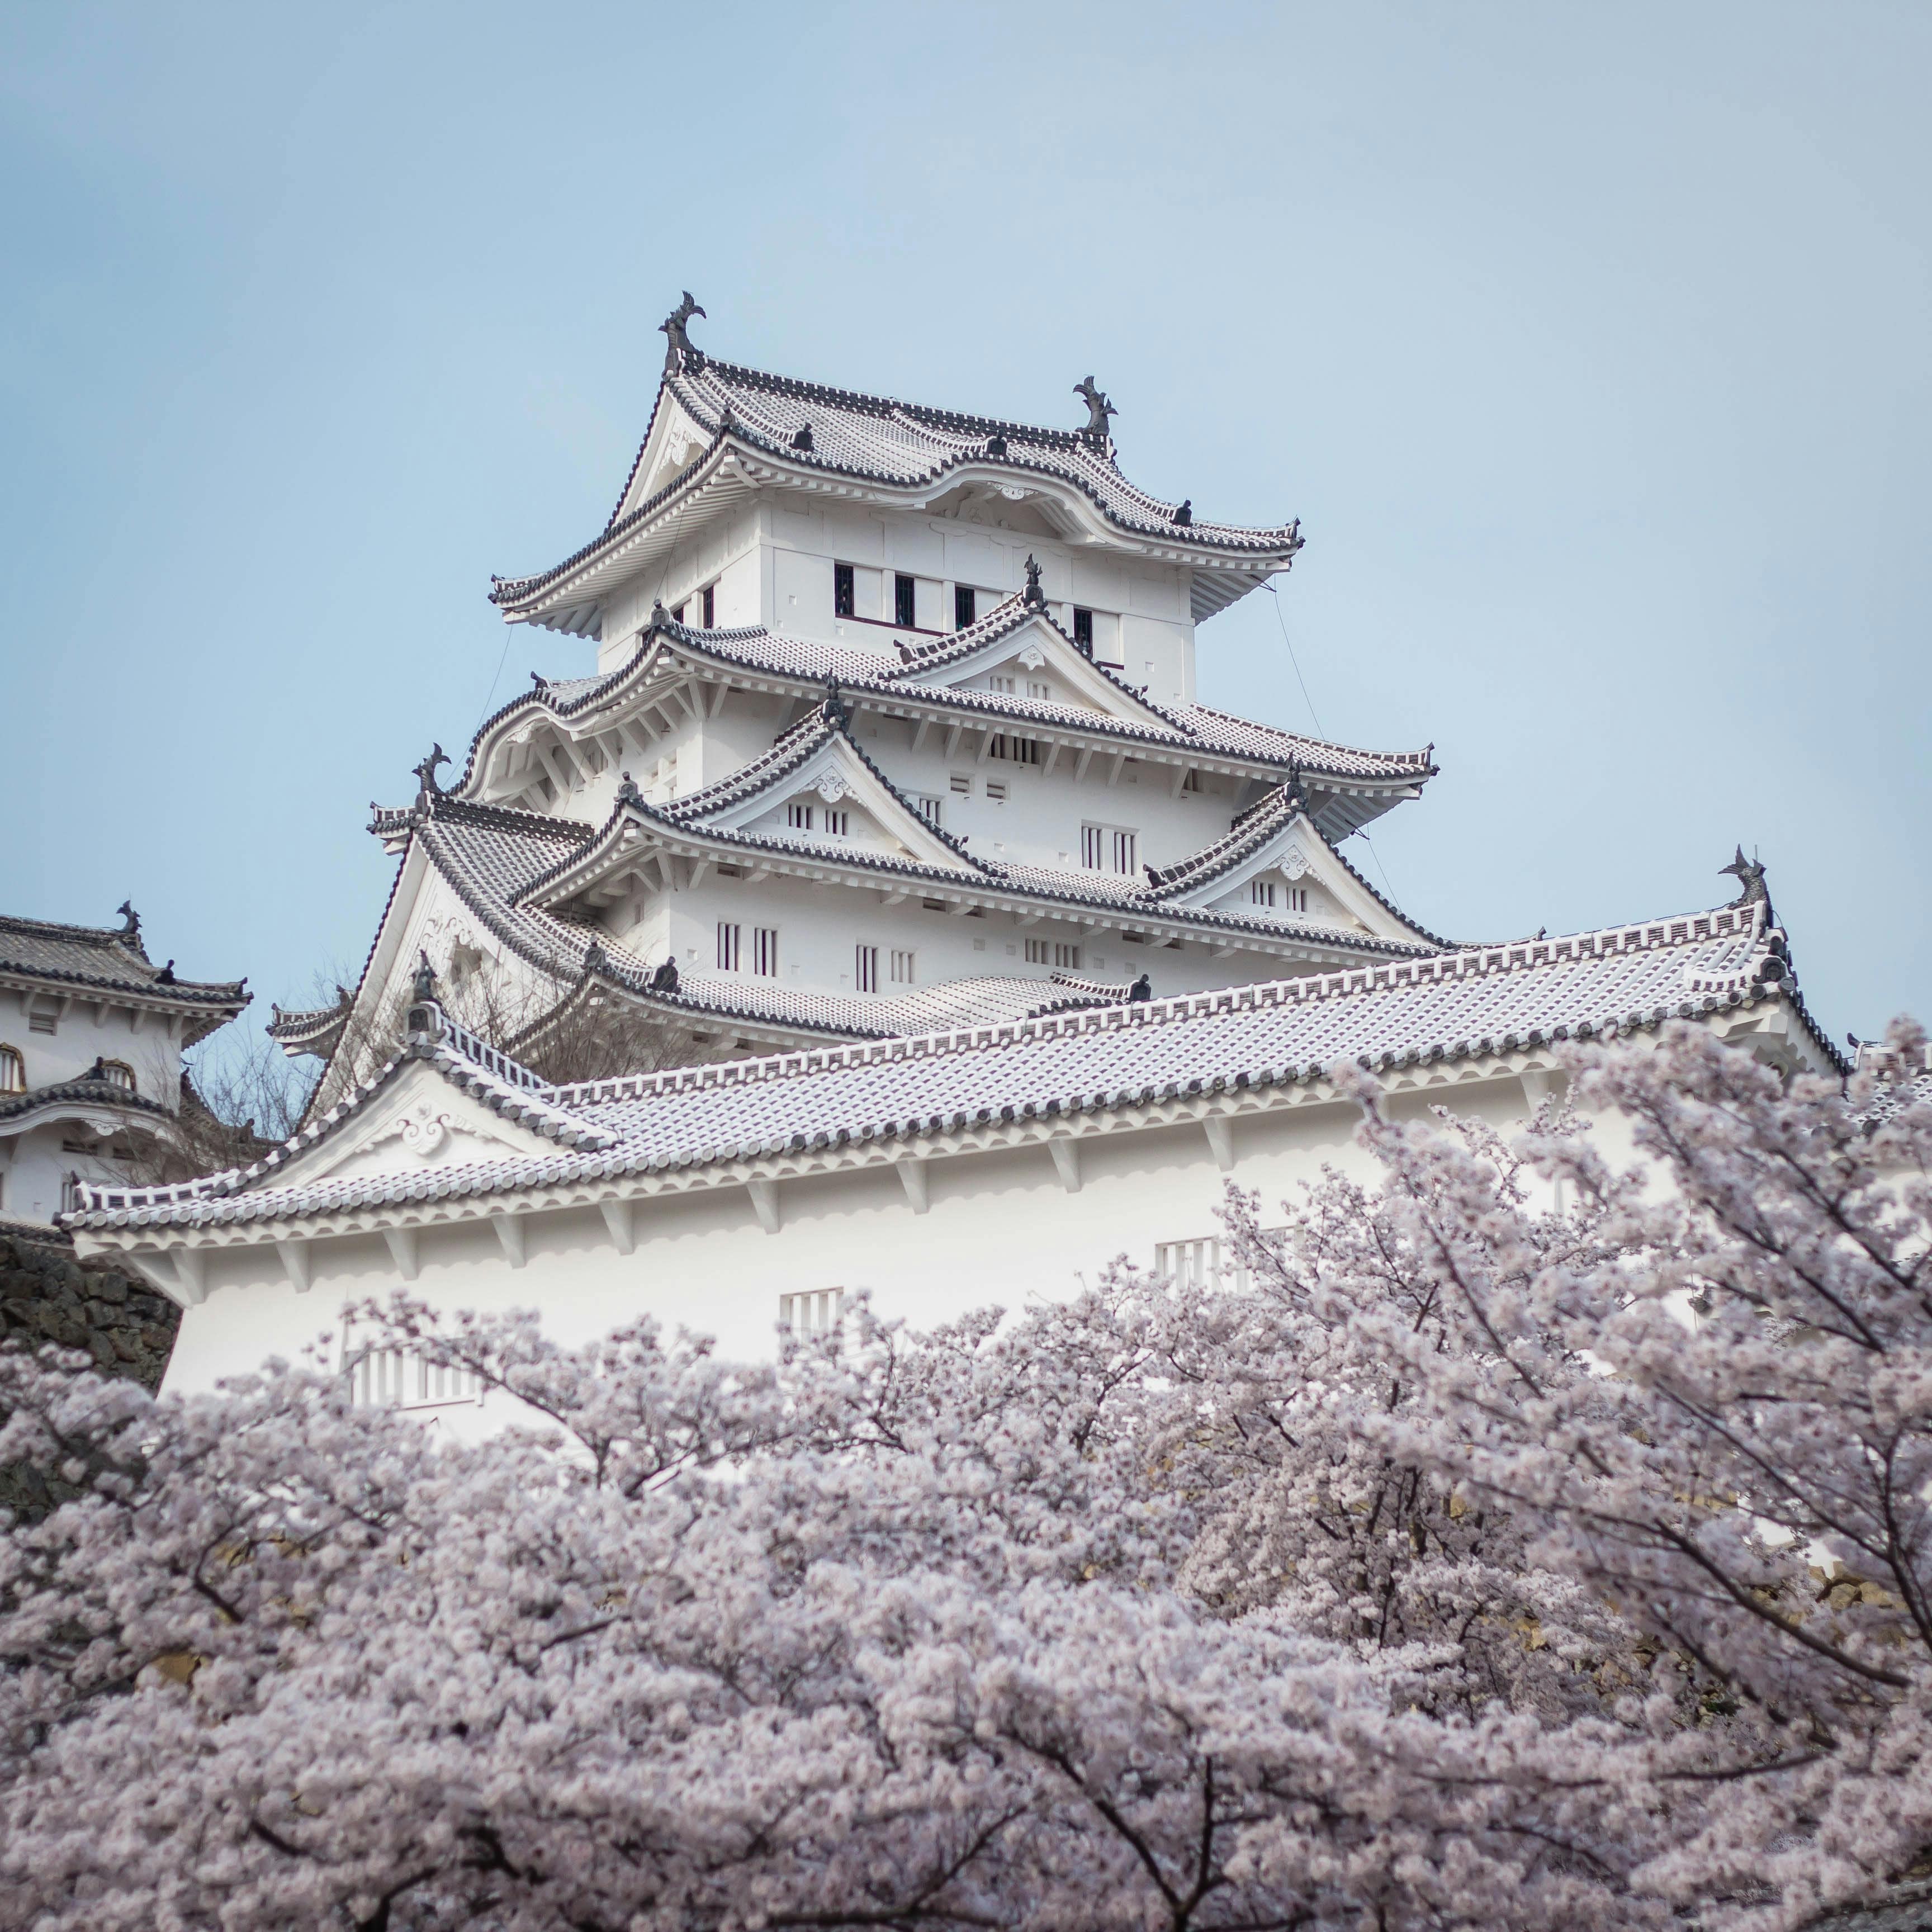 Transport you to the enchanting landscapes where nature and architecture harmonize. Book today for a journey through the picturesque charm of Japan.